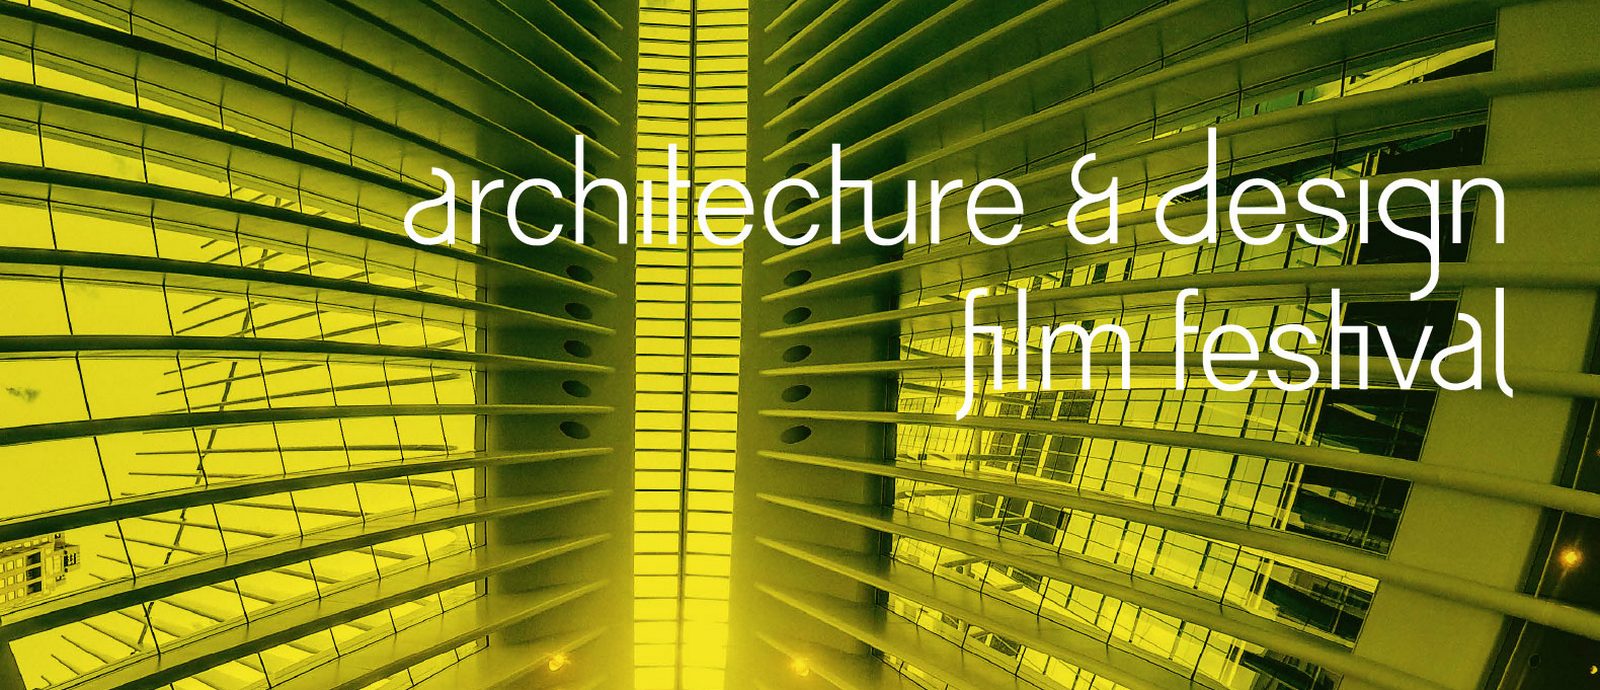 Archisearch ARCHITECTURE AND DESIGN FILM FESTIVAL ATHENS 2018 by Archisearch.gr and DEMAND SA